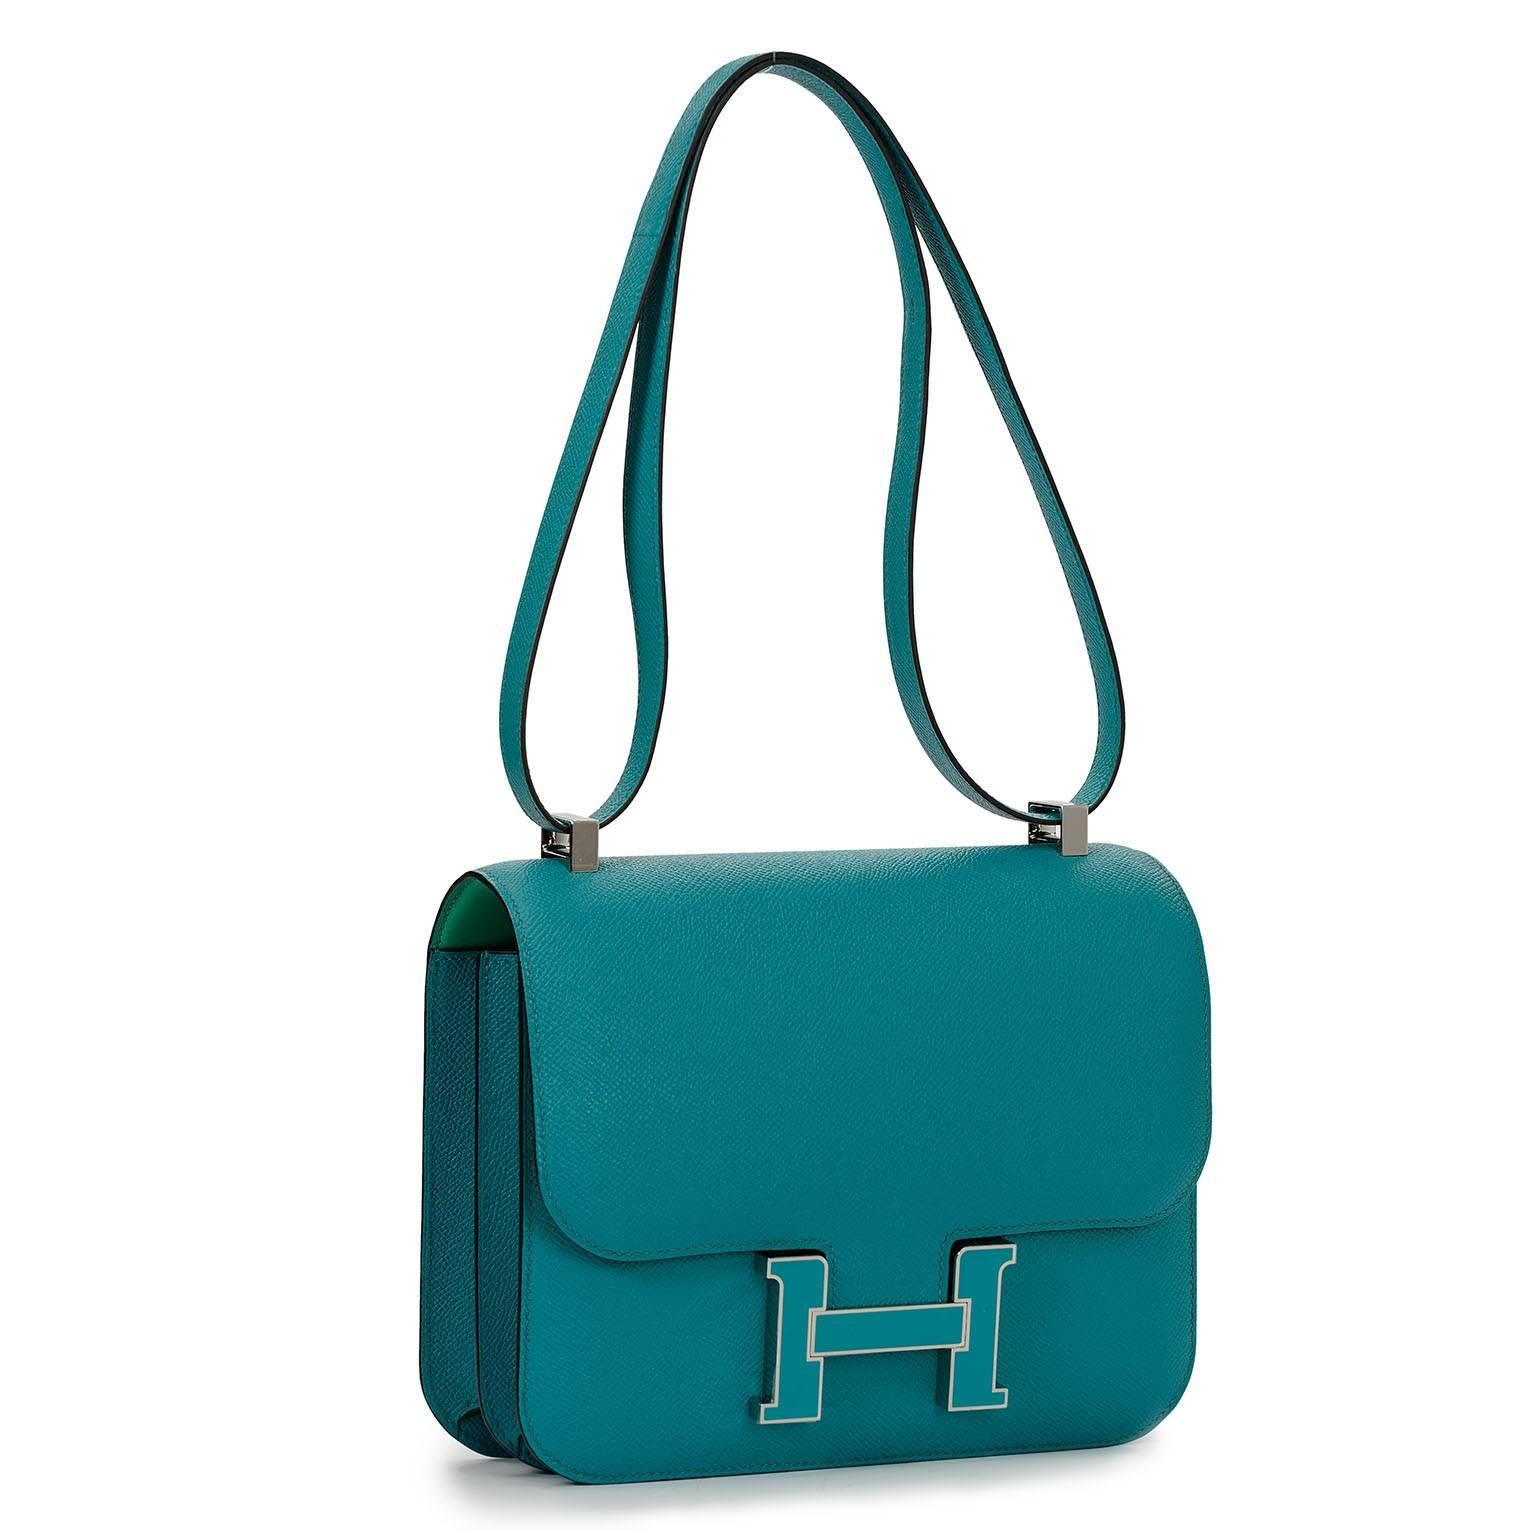 Limited Edition!
Rare!
Collectors item!

Constance 24 cm made in Blue Paon Epsom leather with a matching enamel H clasp on its flap closure and as a bonus green Mint inside!!! 
Full set with original Hermès store receipt and original packaging.

Bag